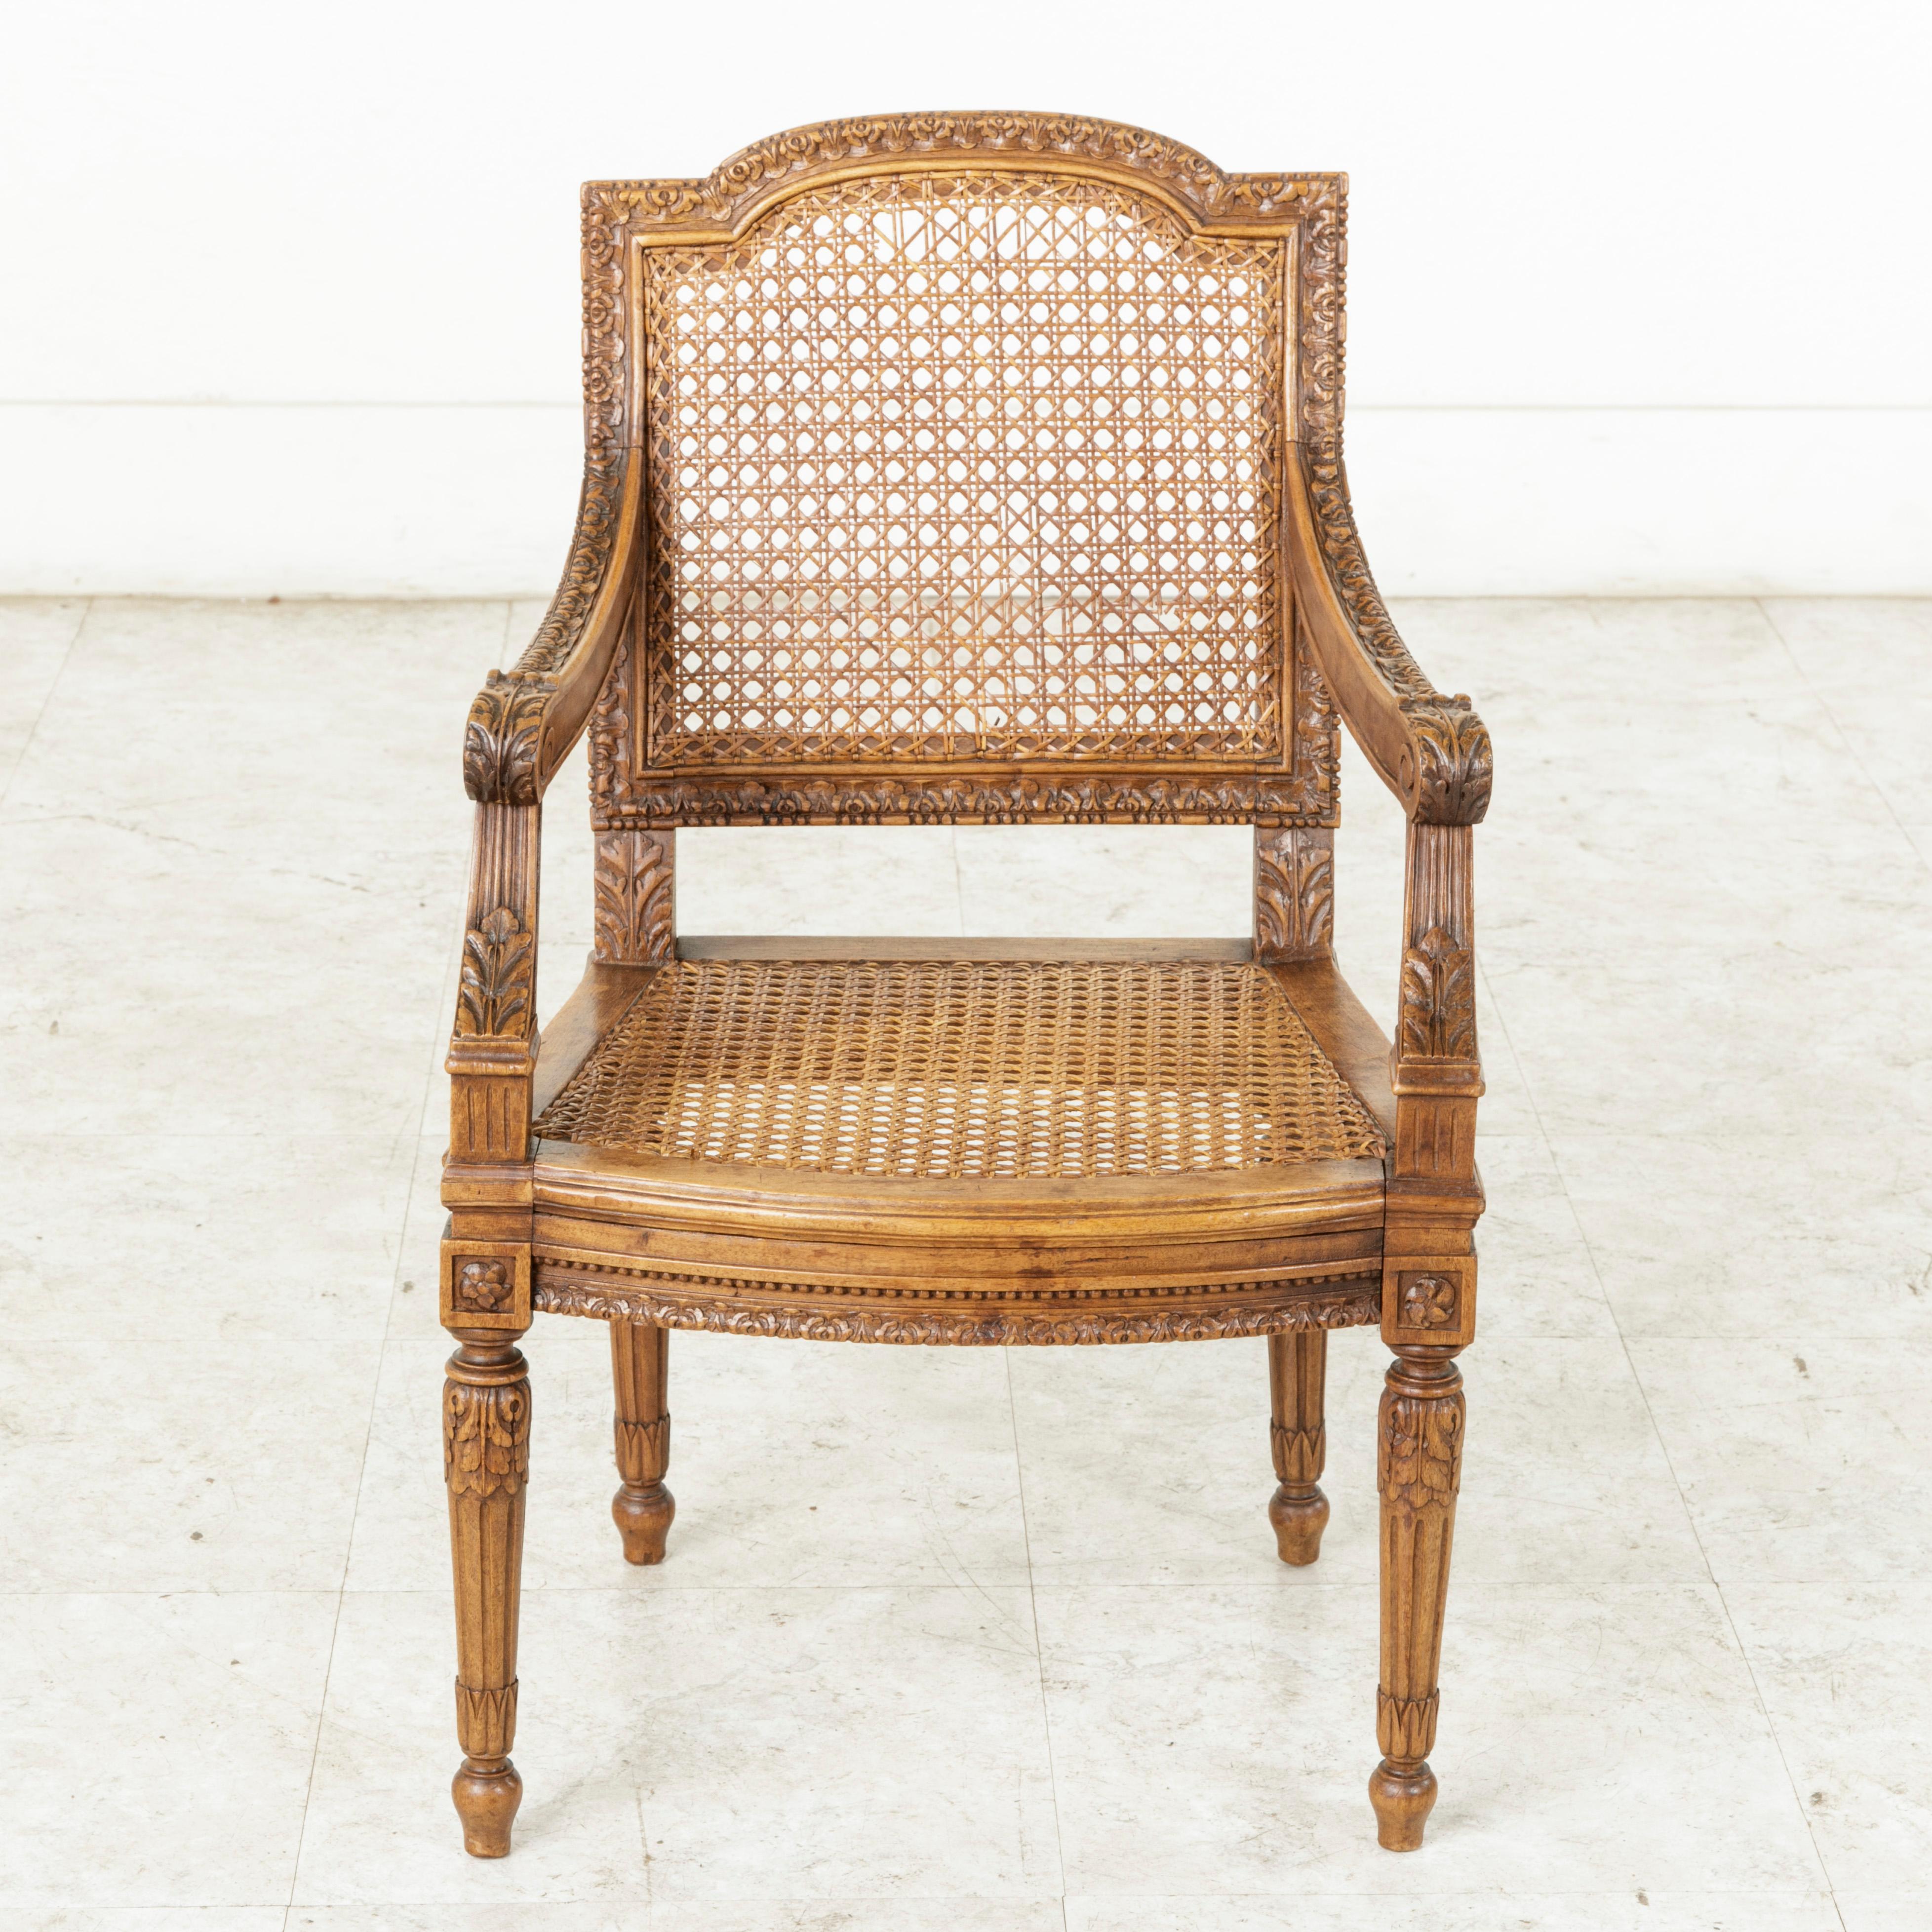 This mid-19th century French walnut child's chair features Classic Louis XVI style hand carvings and a caned seat and seat back in excellent condition. Carvings of stylized acanthus leaves detail the seat back and scrolled arm rests. Rosettes adorn